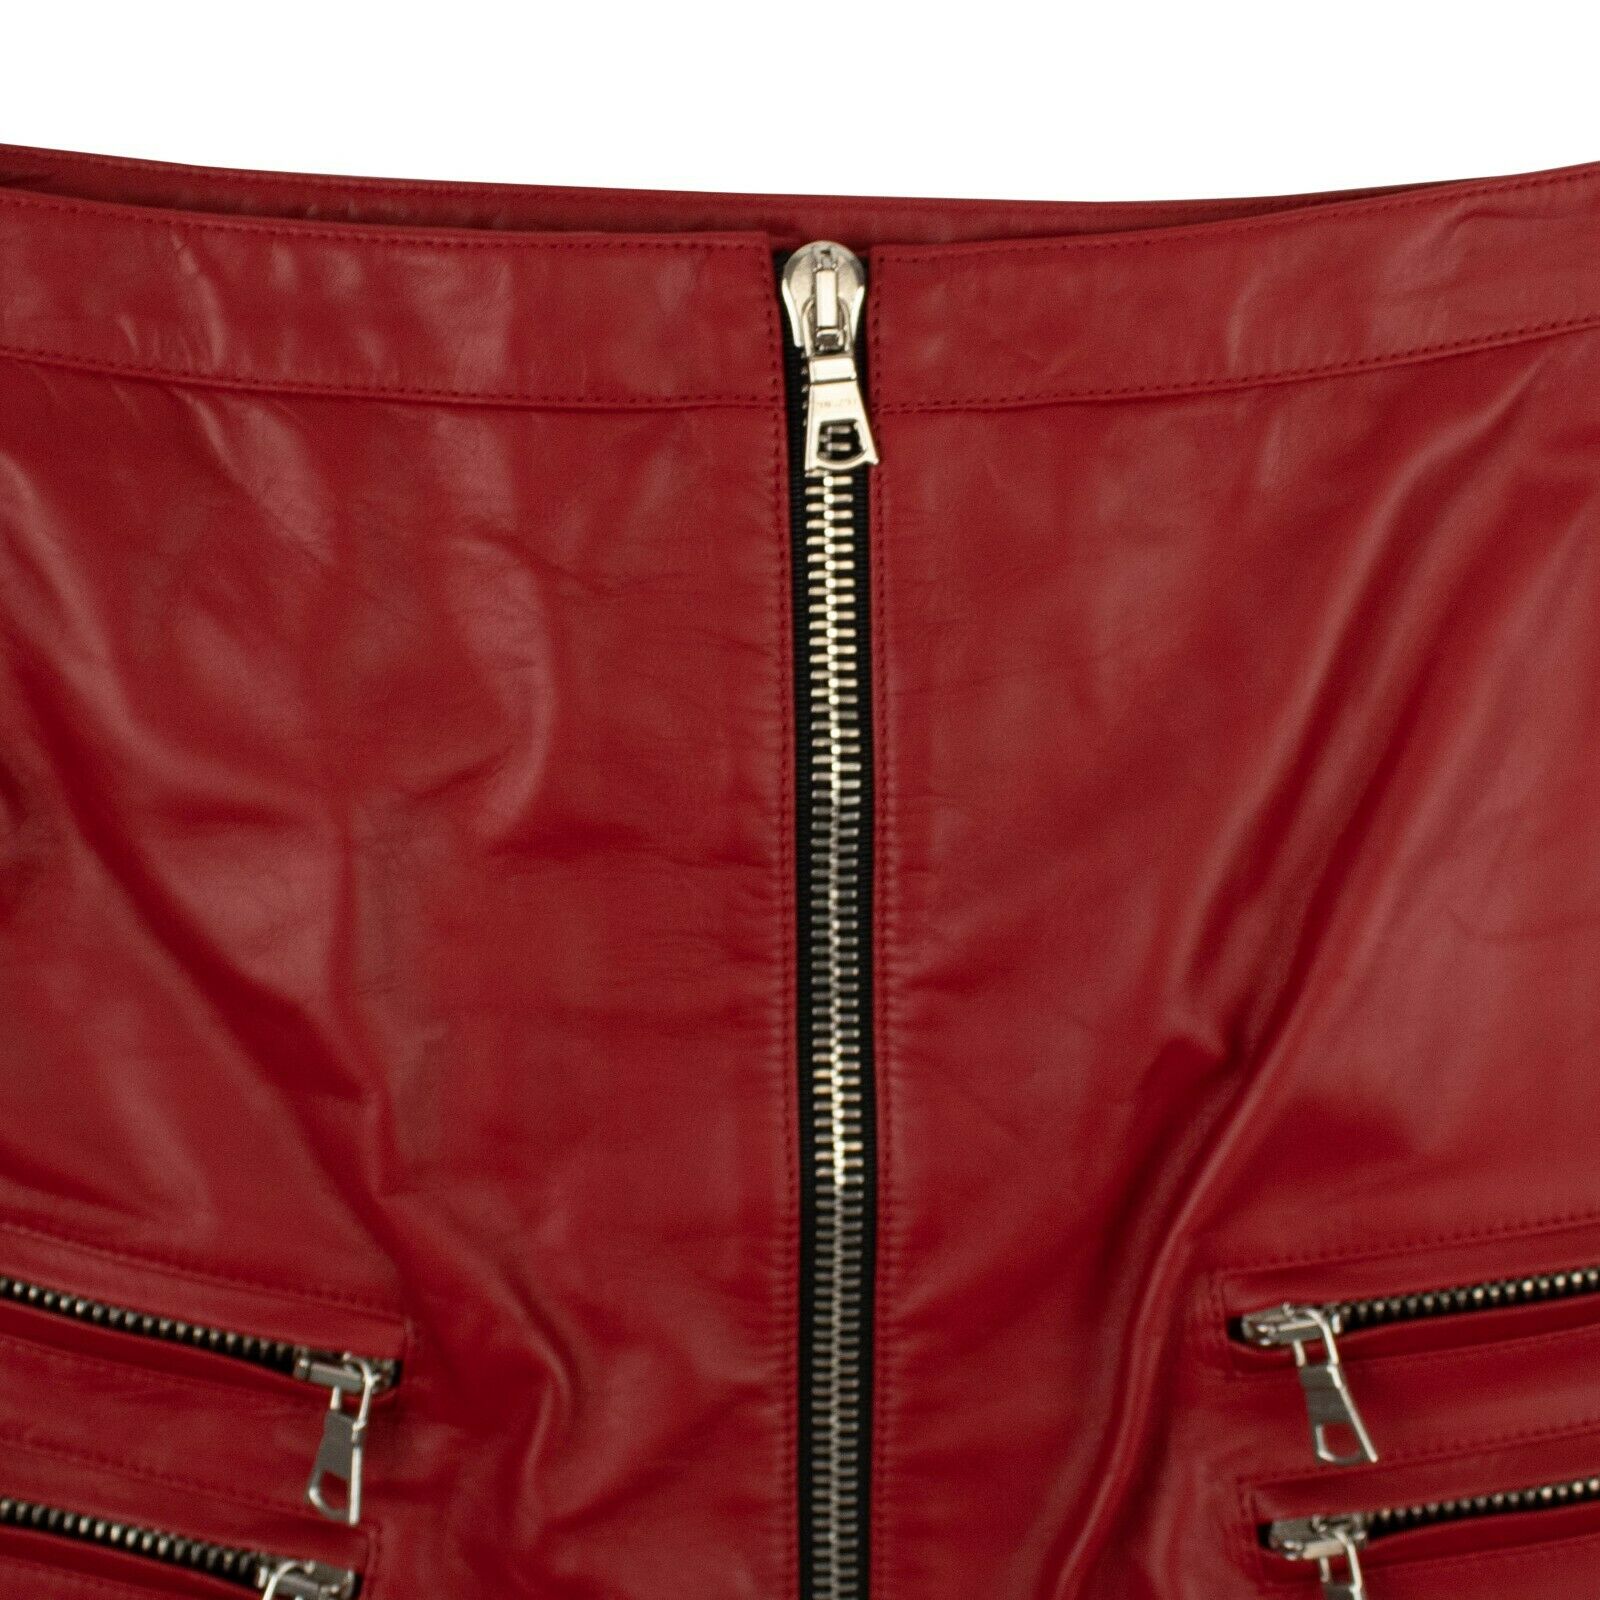 Unravel Project Leather Triple Zip Mini Skirt - Red